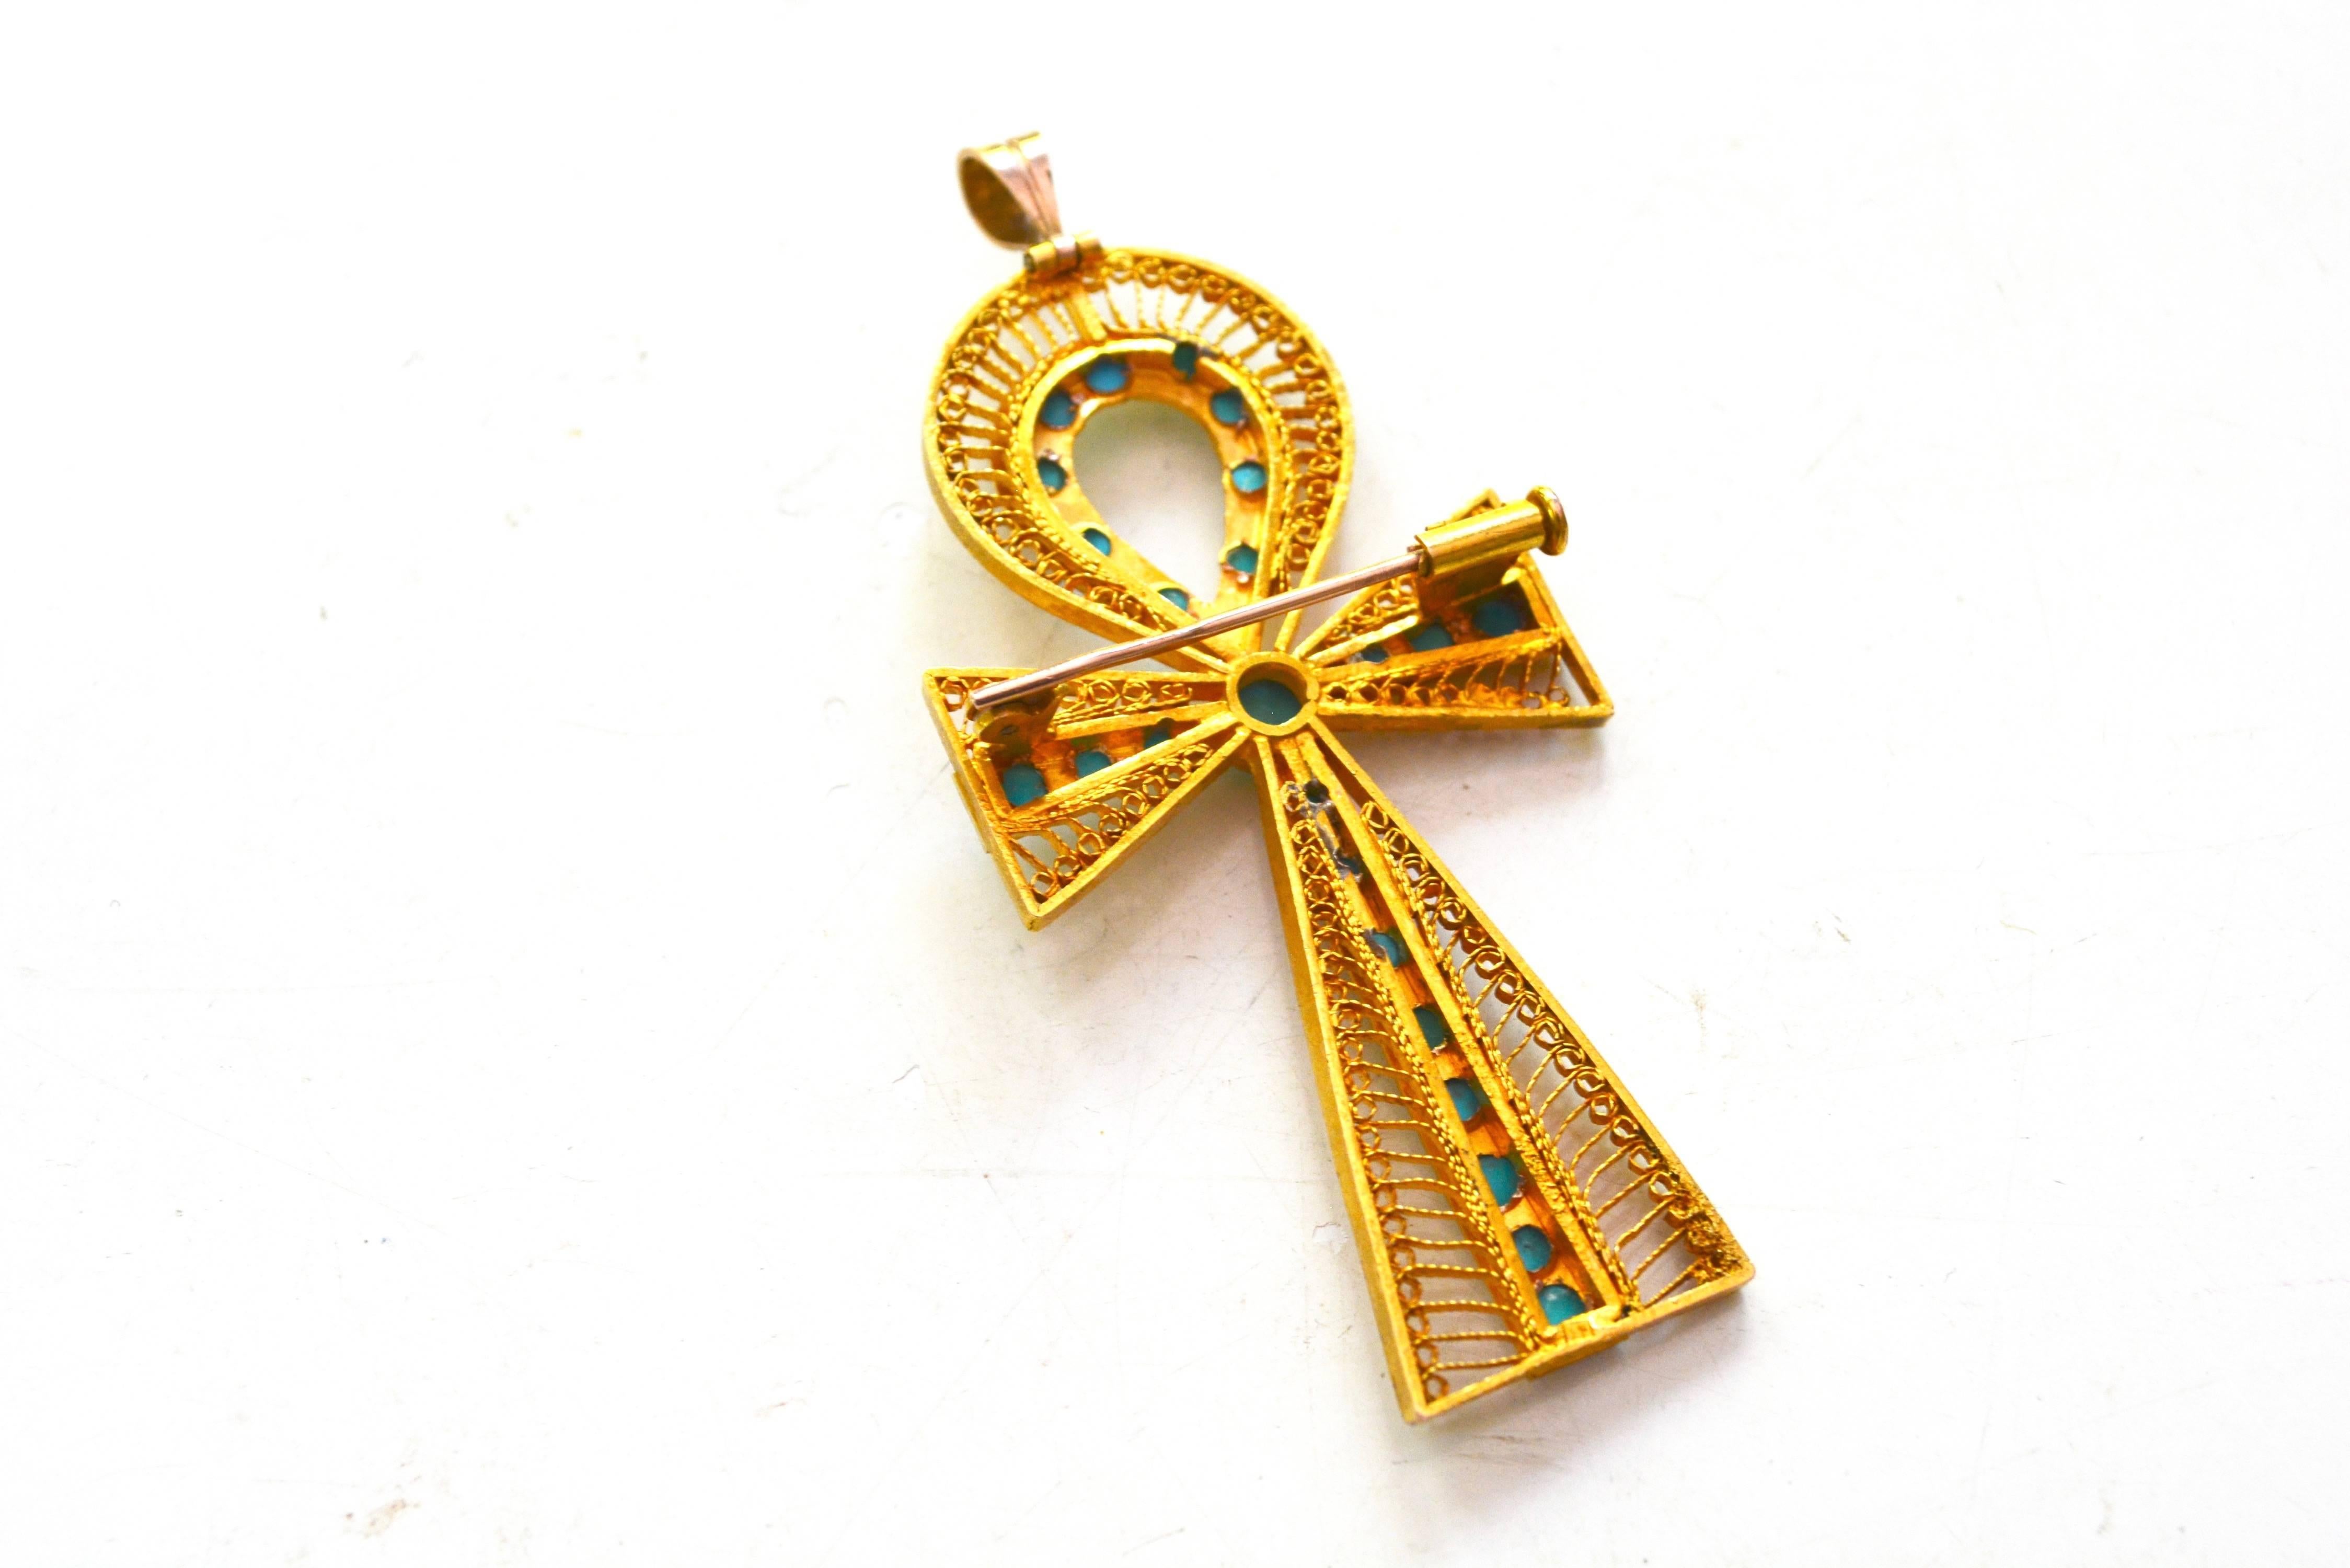 18K Early 1900s-1920s turquoise ankh brooch and pendant. Unsigned. Trumpet clasp with a retractible hook for the pendant. Nice larger size which can be worn alone or added to other charms. 2.5" long x about 1.25" wide. 